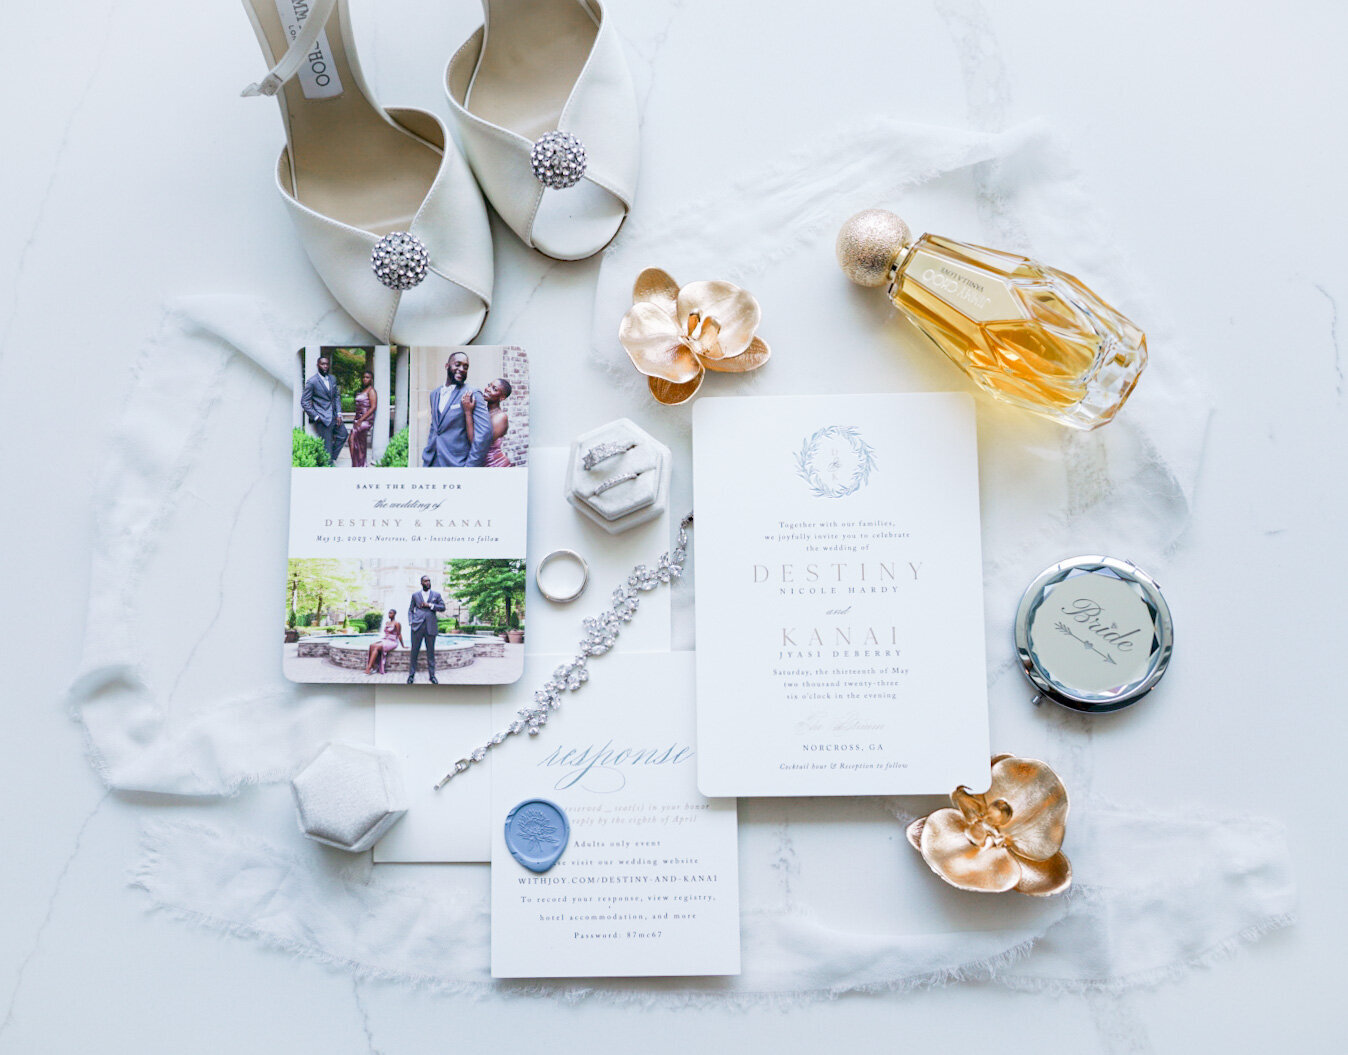 Wedding day details displaying the brides shoes, jewlery and invitation suite.